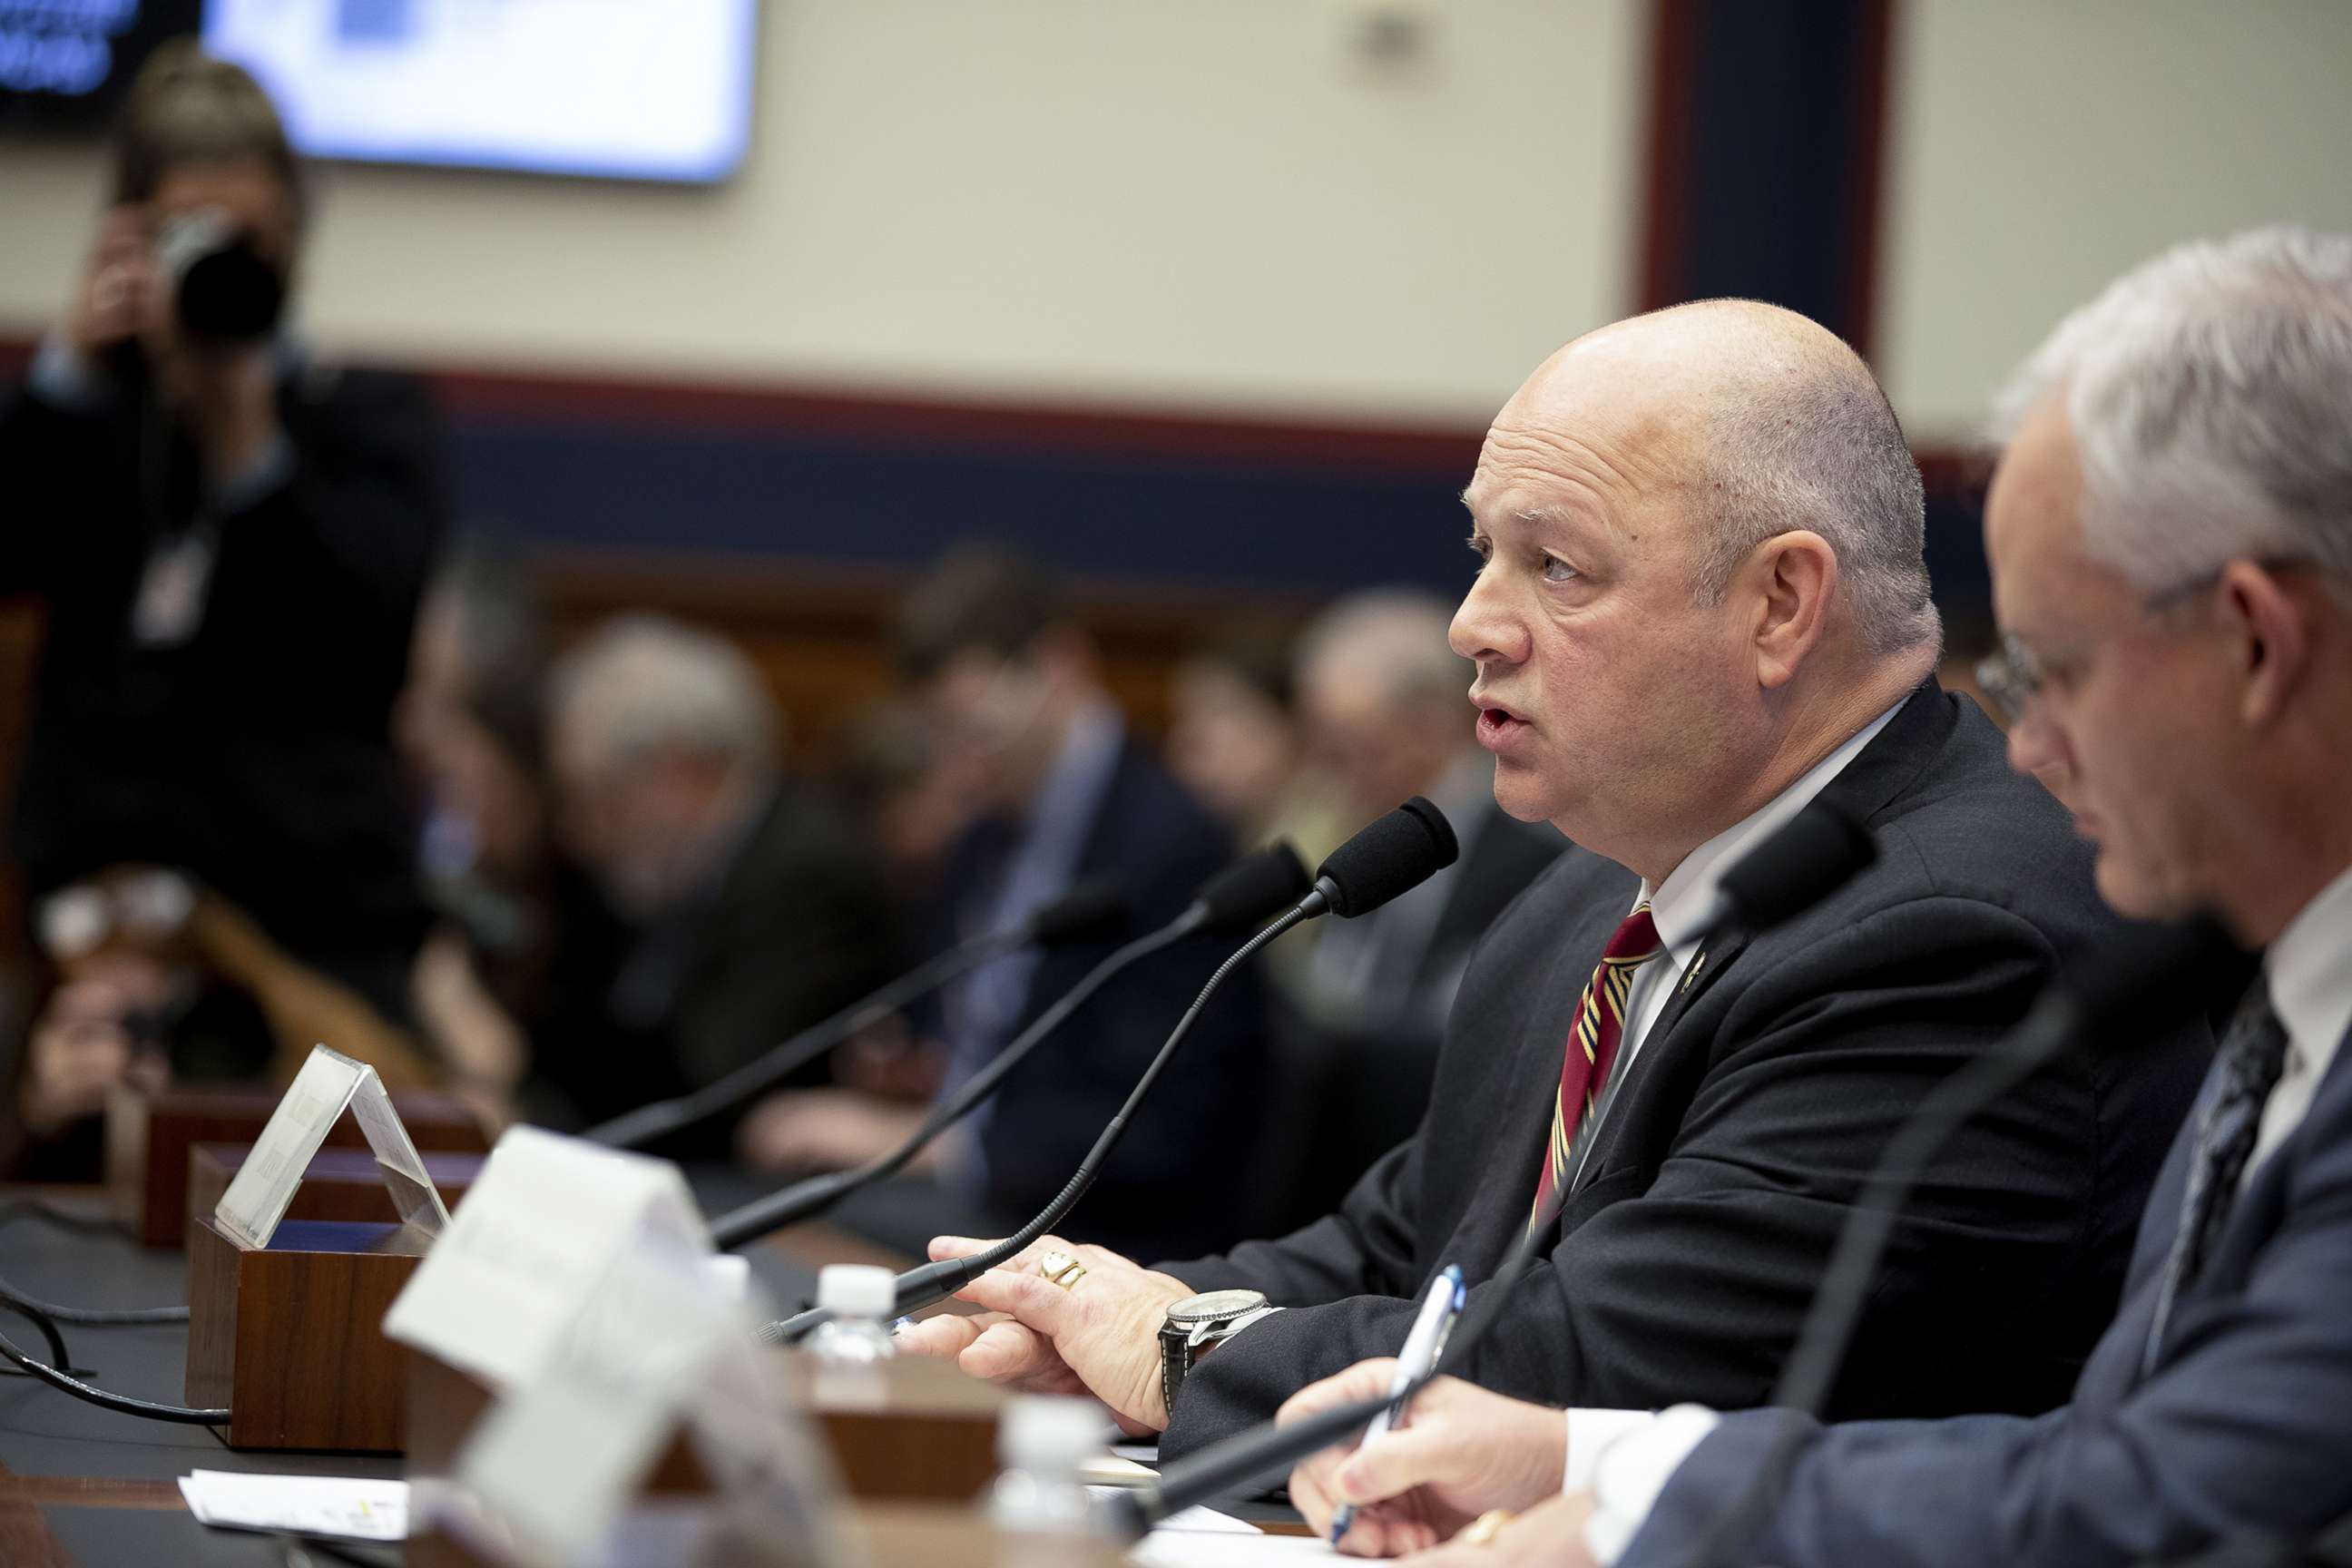 PHOTO: FAA ADMINISTRATOR Stephen M. Dickson speaks at a Oversight Hearing, Dec. 11, 2019, in Washington, D.C.